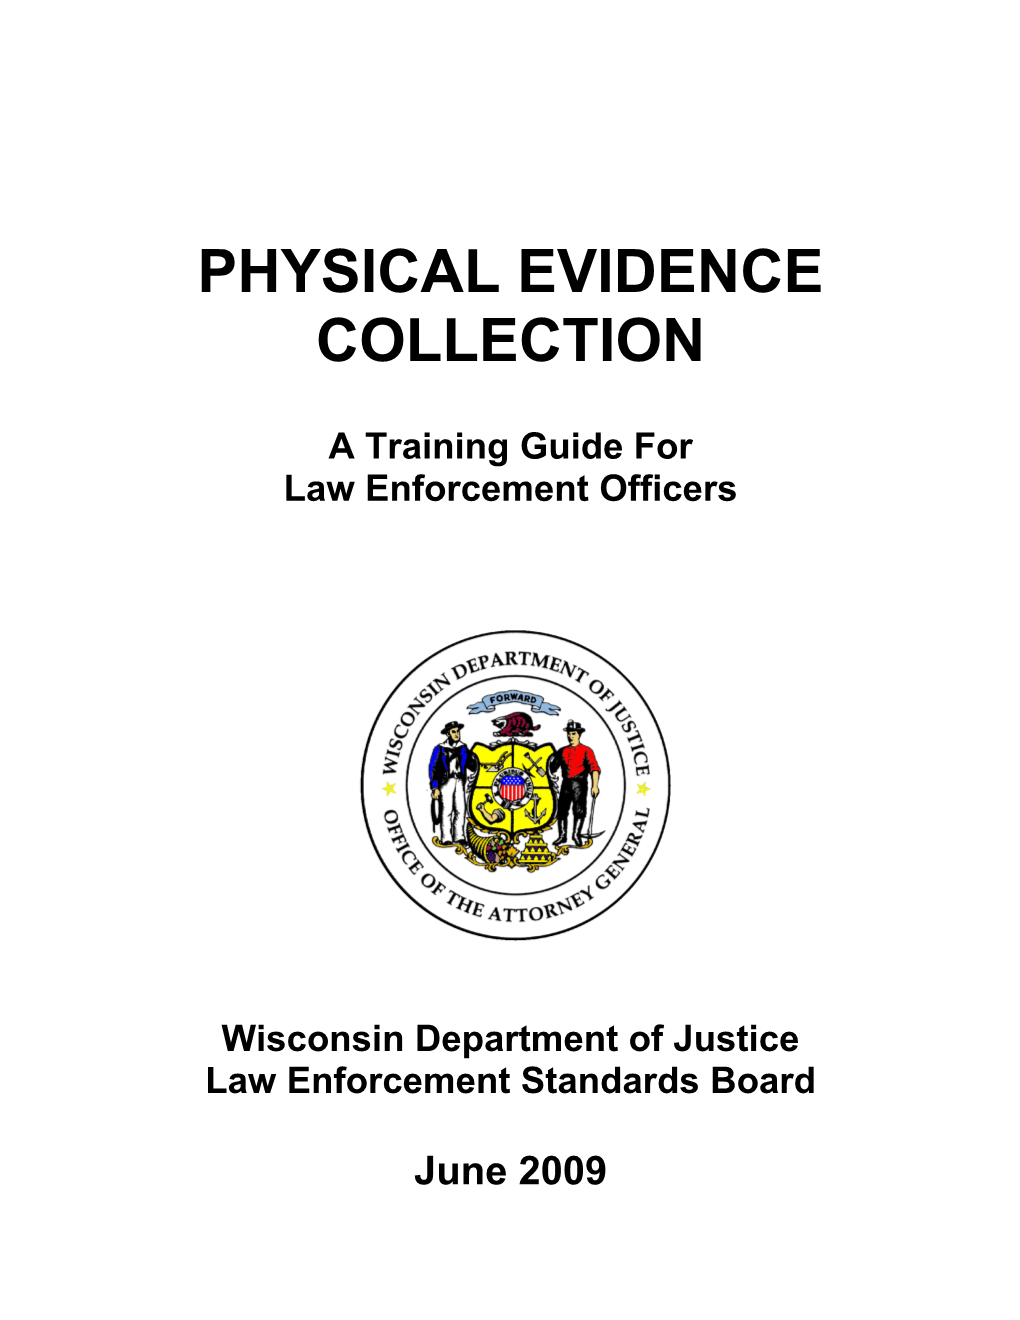 Physical Evidence Collection